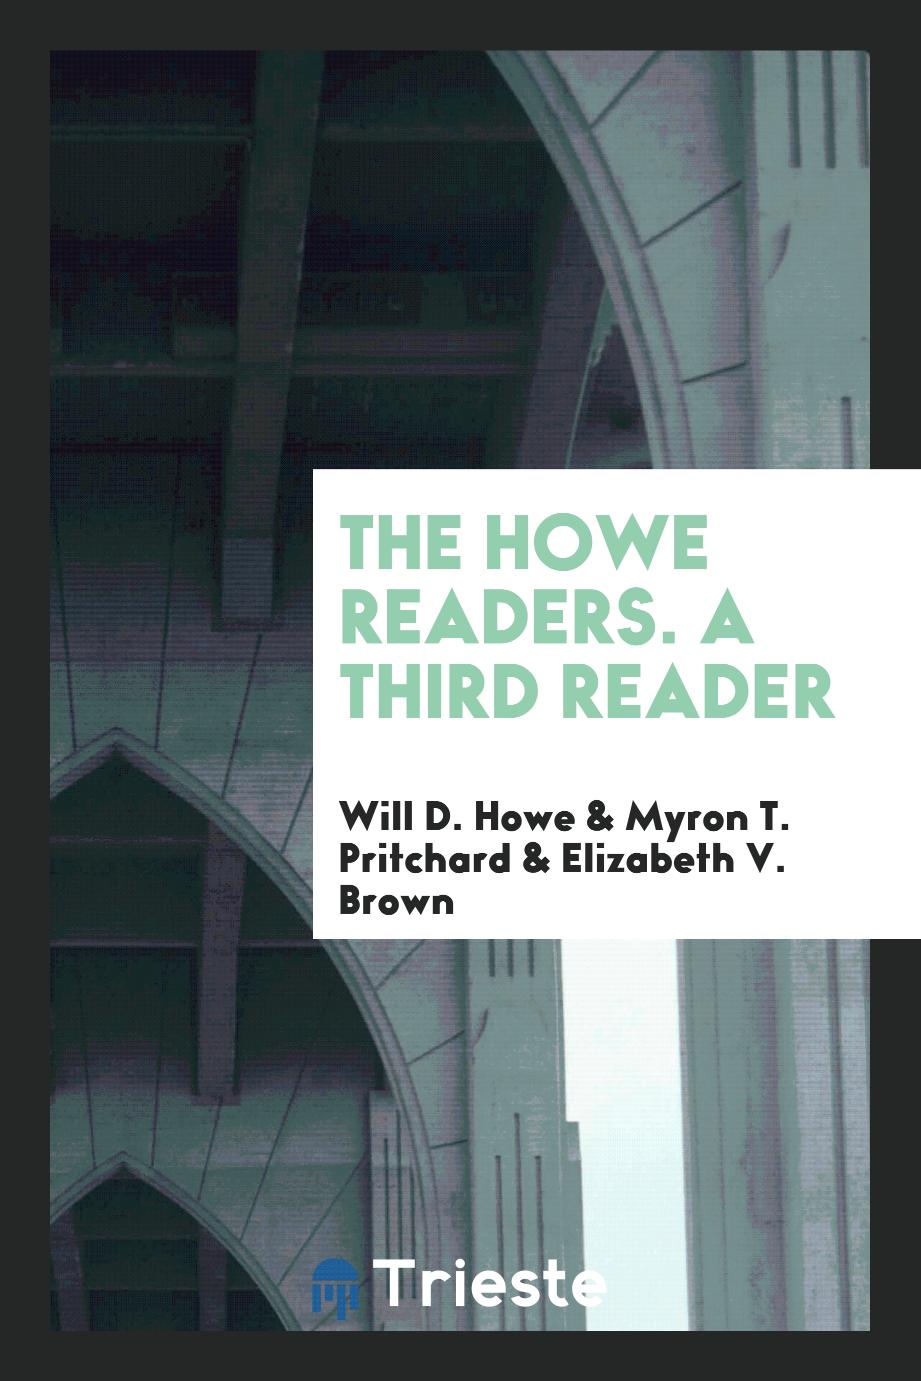 The Howe Readers. A Third Reader